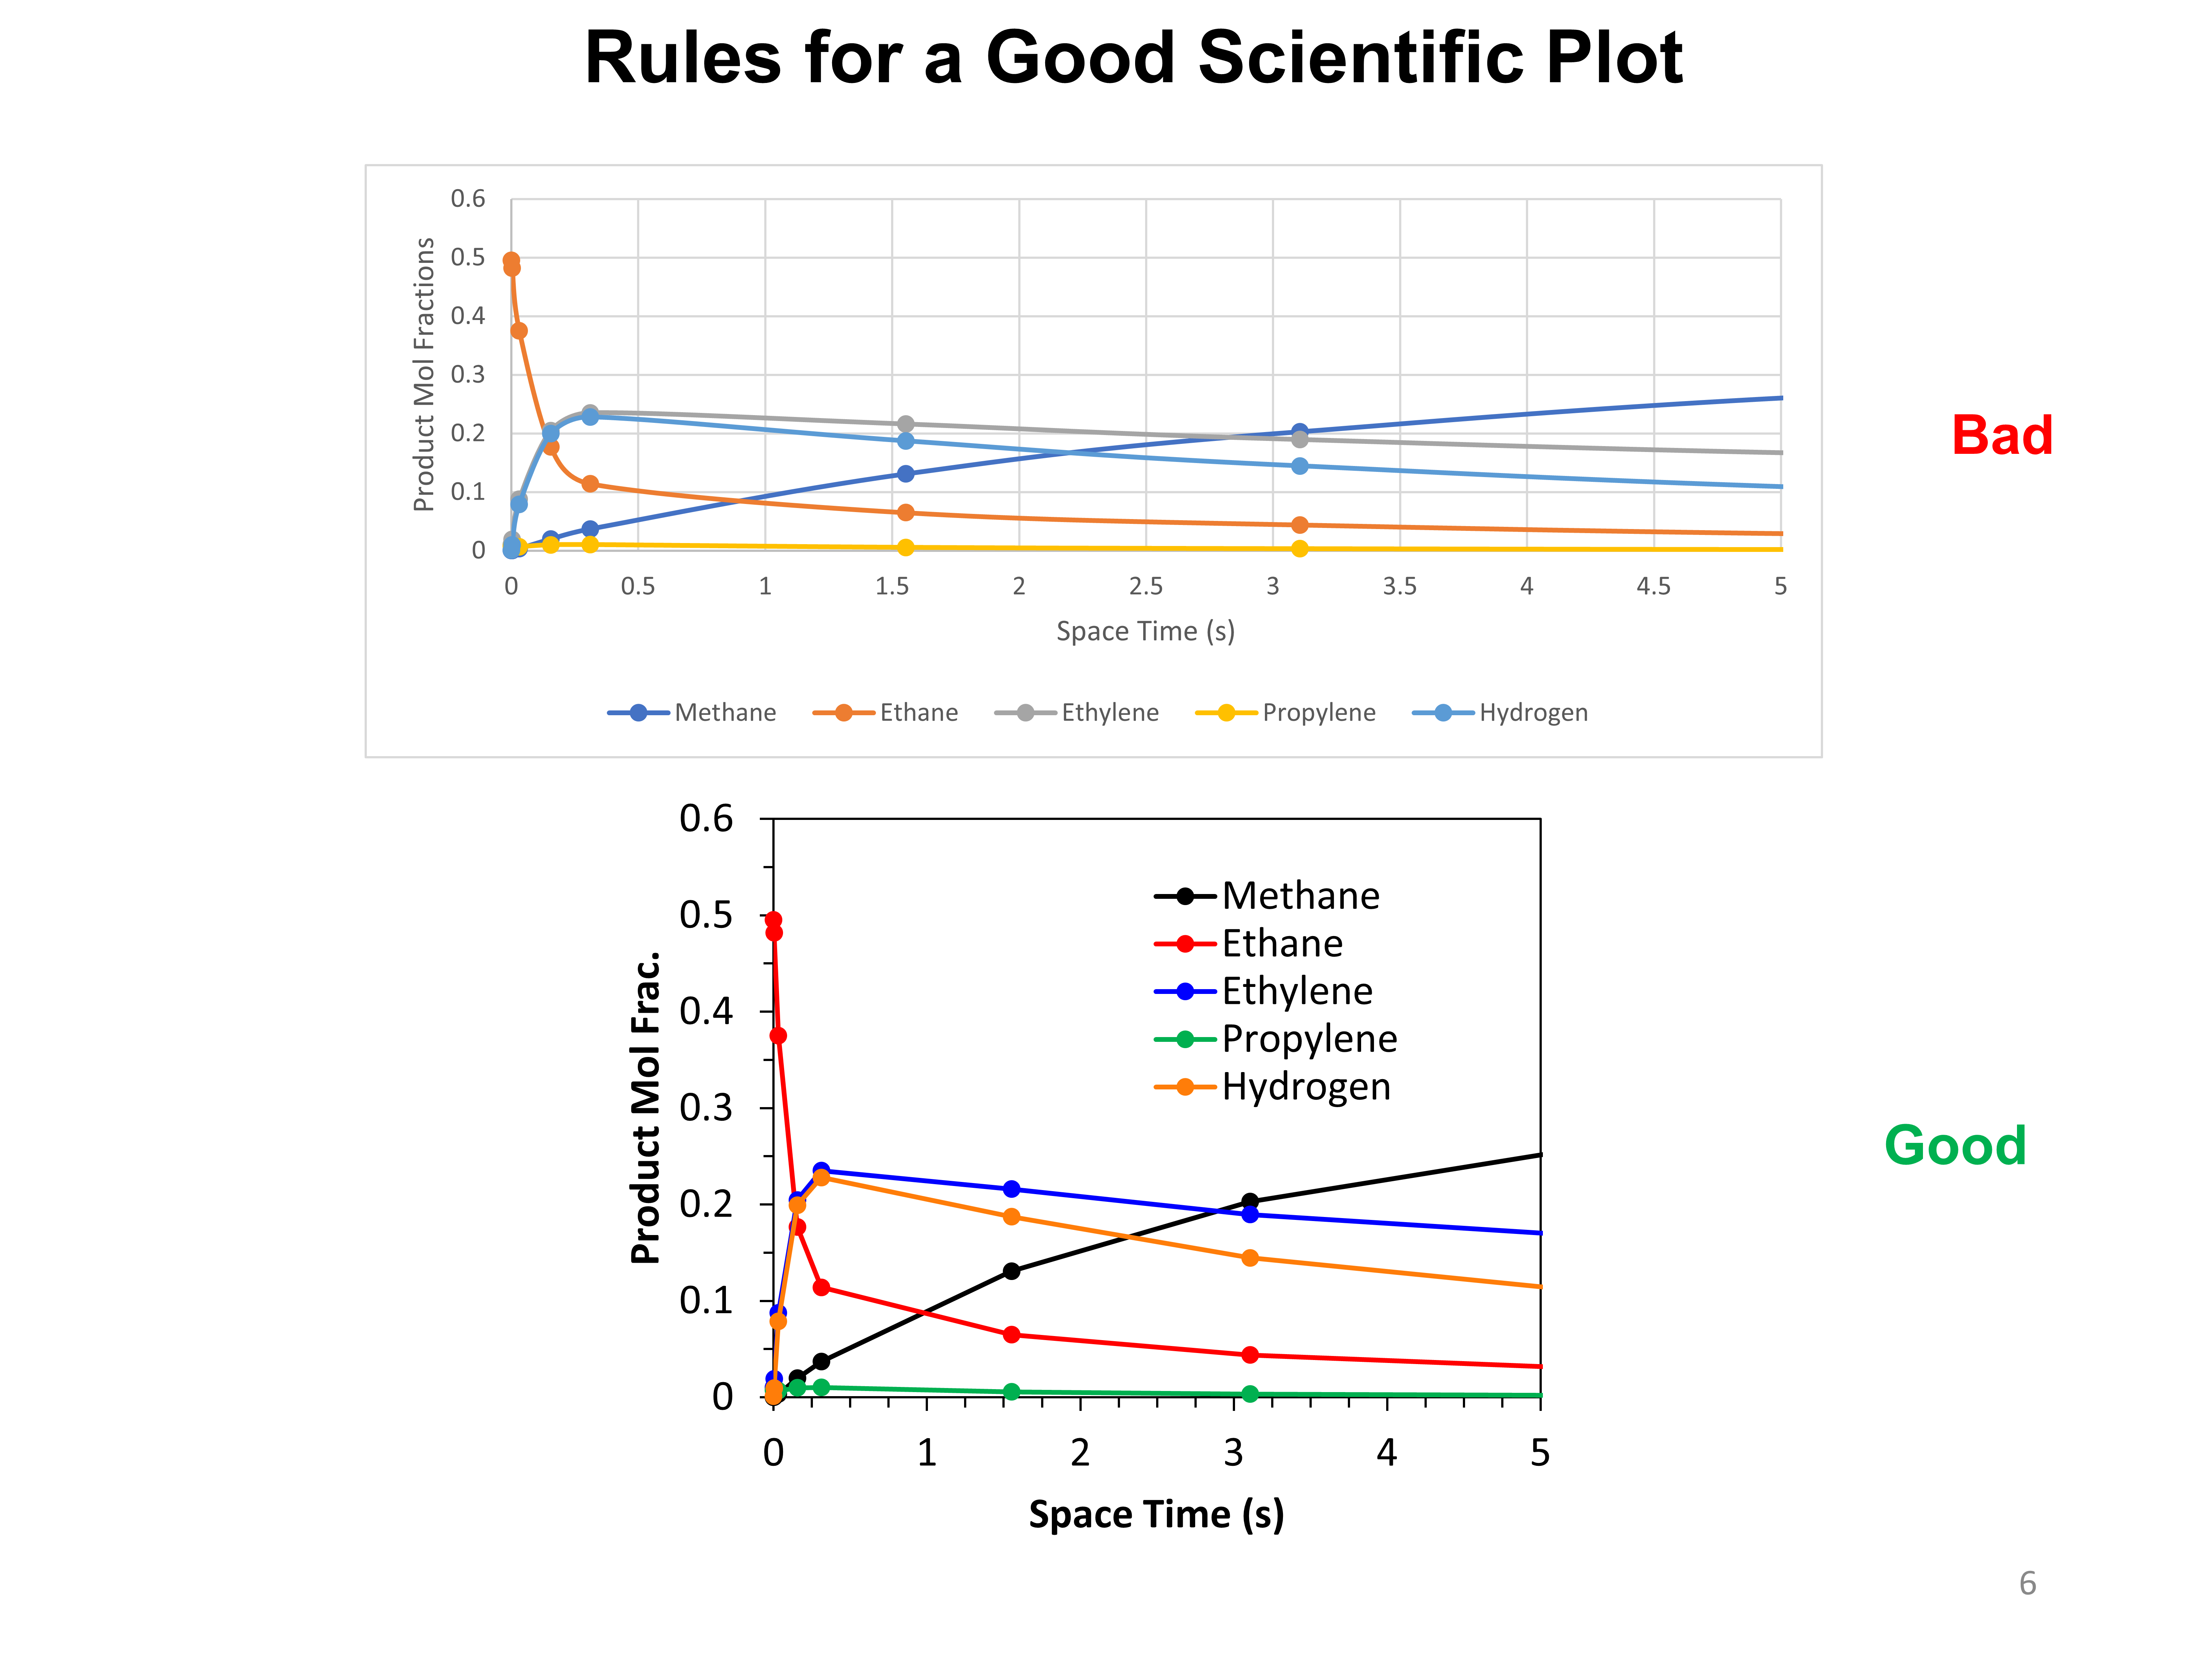 Rules for Good Scientific Plots